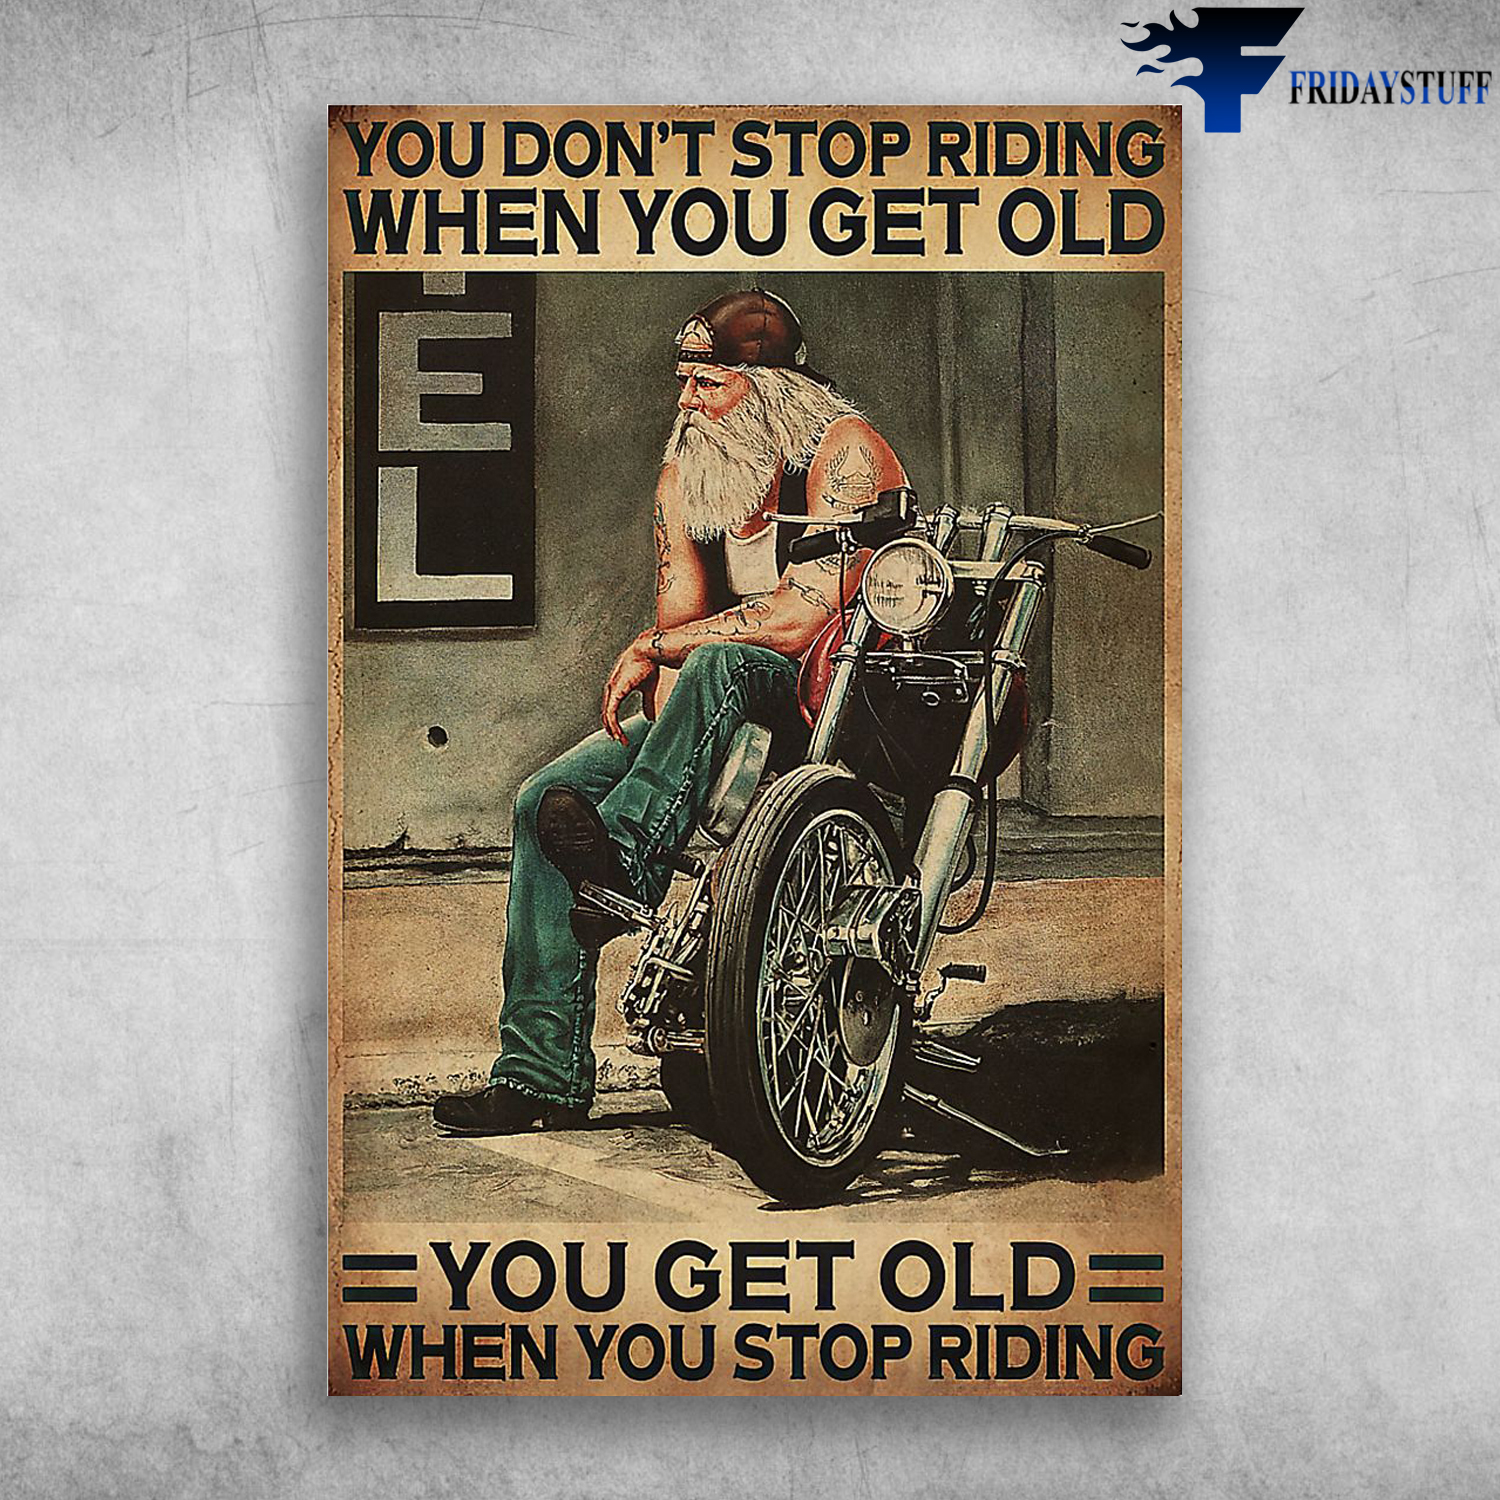 The Bearded Man Is Sitting In His Bike - You Don't Stop Riding When You Get Old